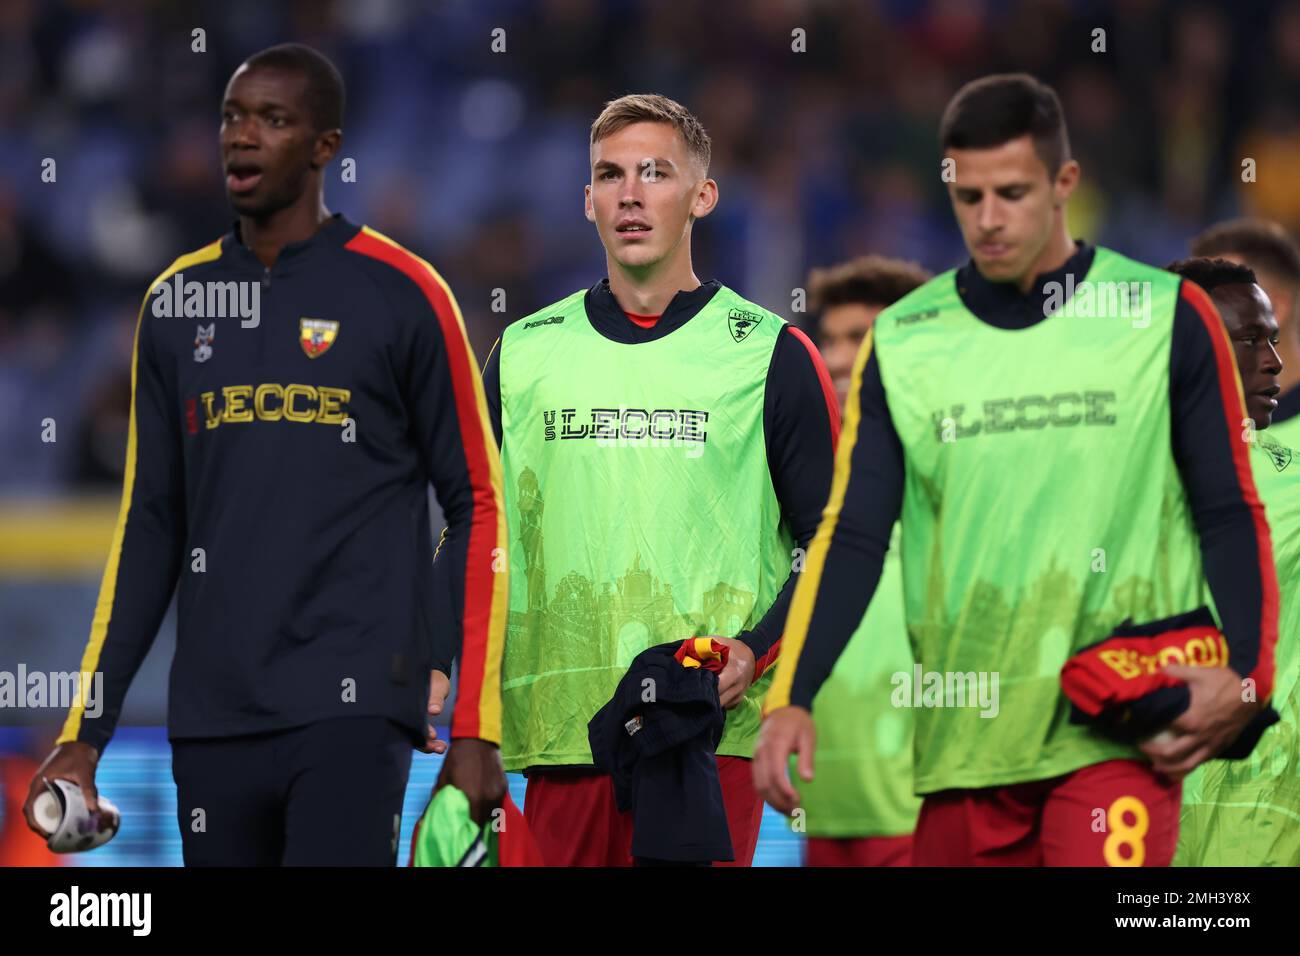 Genoa, Italy, 12th November 2022. Assan Ceesay, Kristoffer Askildsen and Kristin Bistrovic of US Lecce cross the field of play as they make their paths to the bench prior to kick off in the Serie A match at Luigi Ferraris, Genoa. Picture credit should read: Jonathan Moscrop / Sportimage Stock Photo